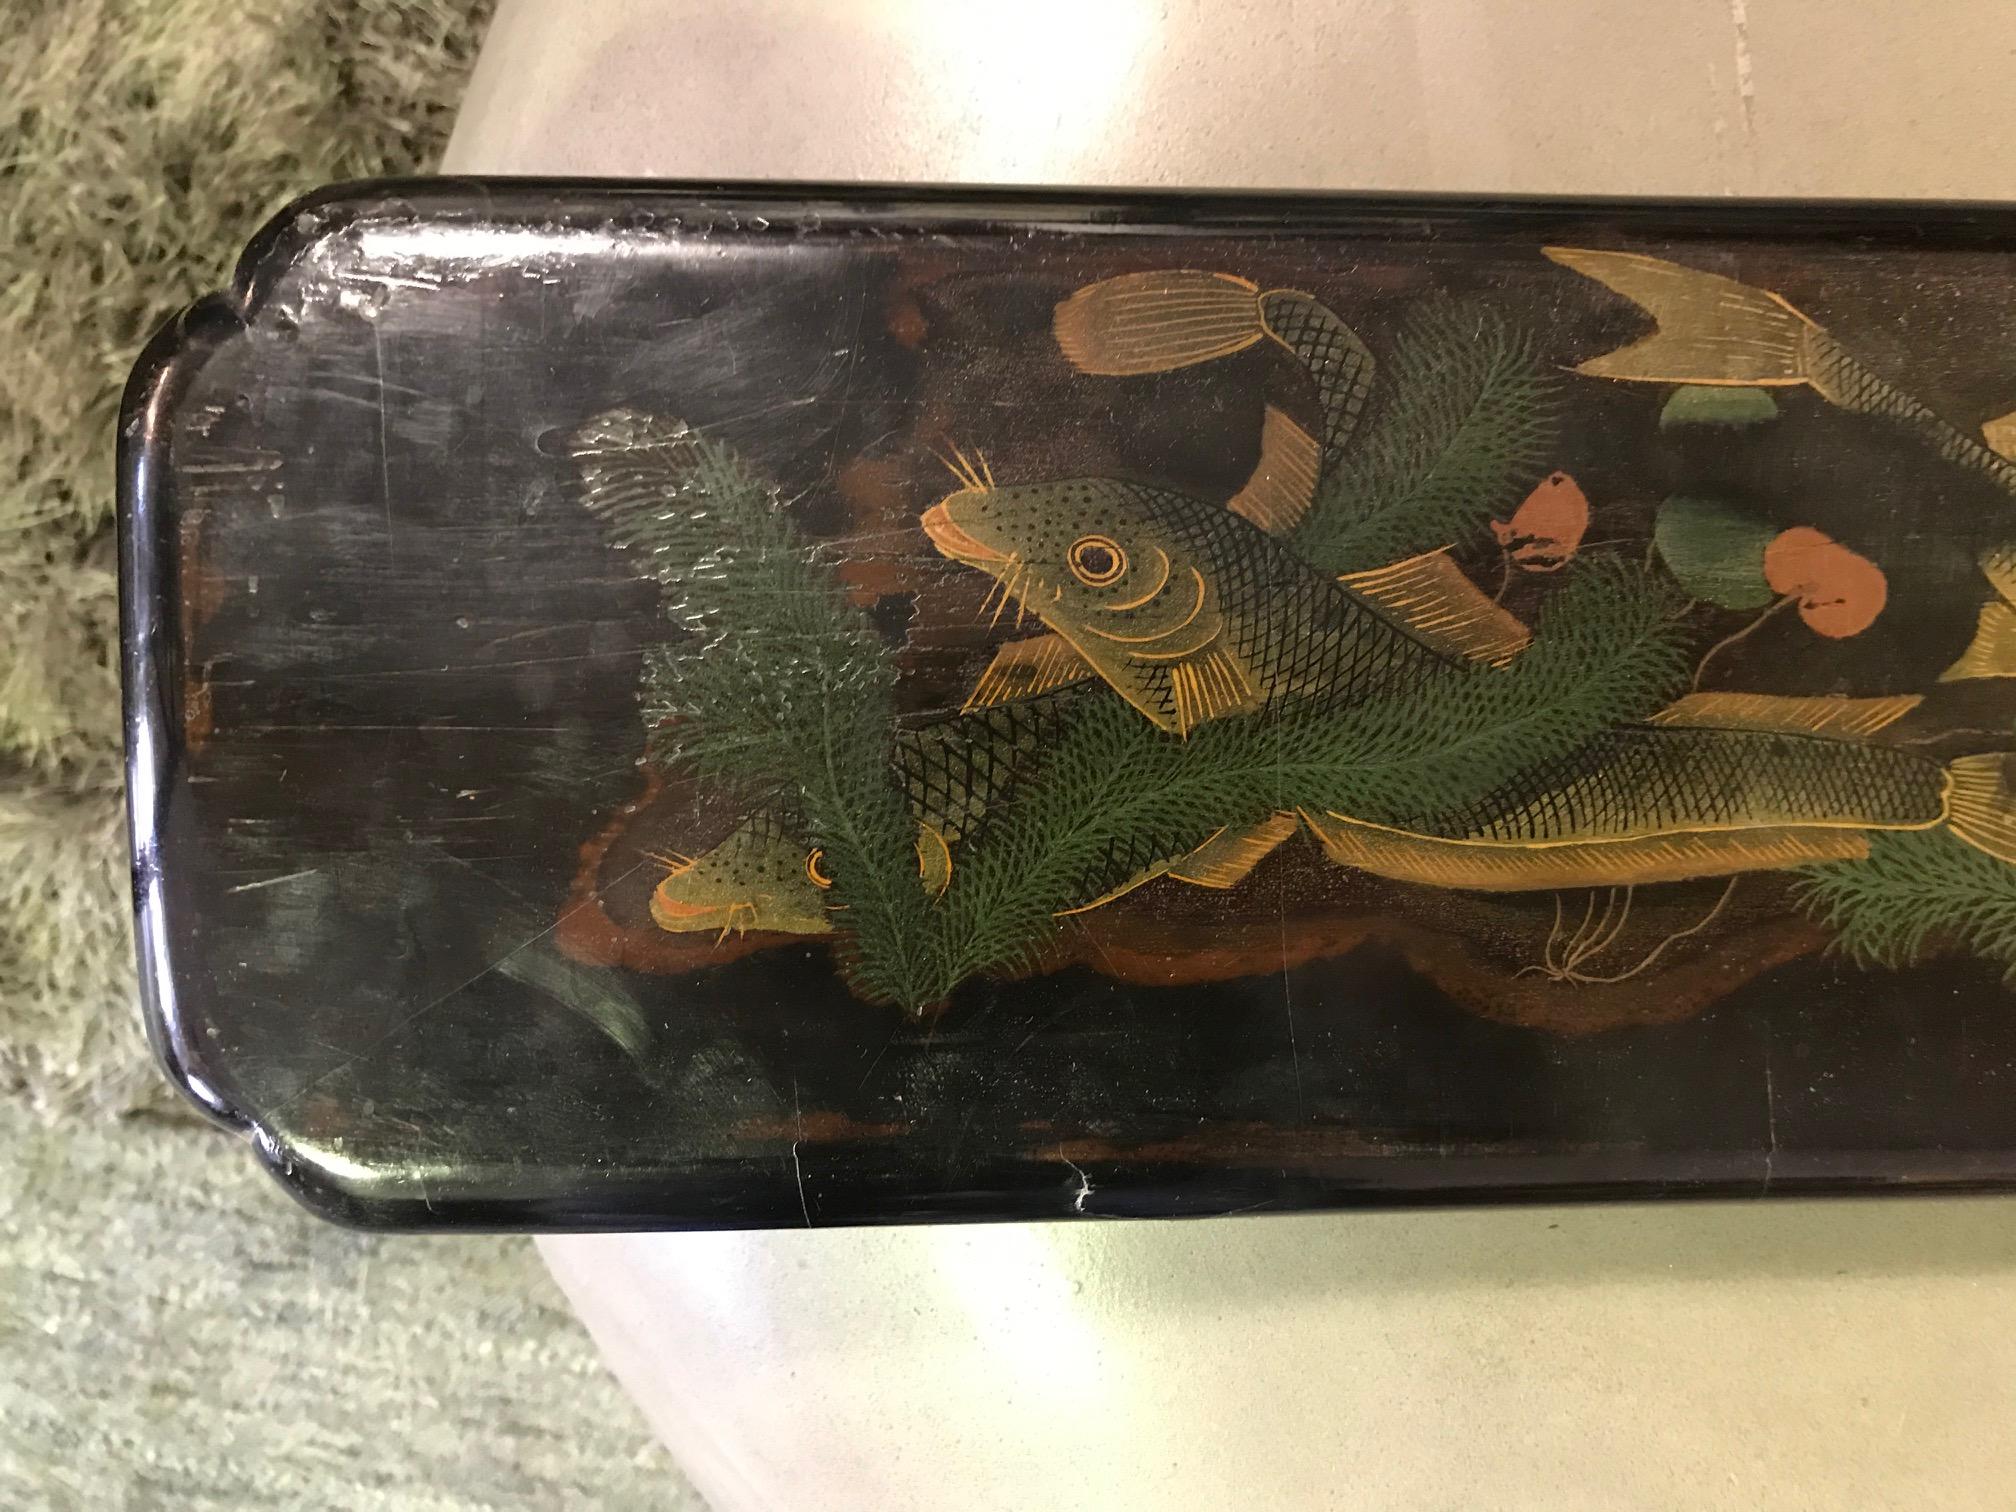 A beautiful and intricate work likely originally from a Japanese Temple. The hand painted scene depicts an oceanic scene full of playful marine creatures.

Would be a unique and wonderful addition to any Asian art and artifacts collections or an